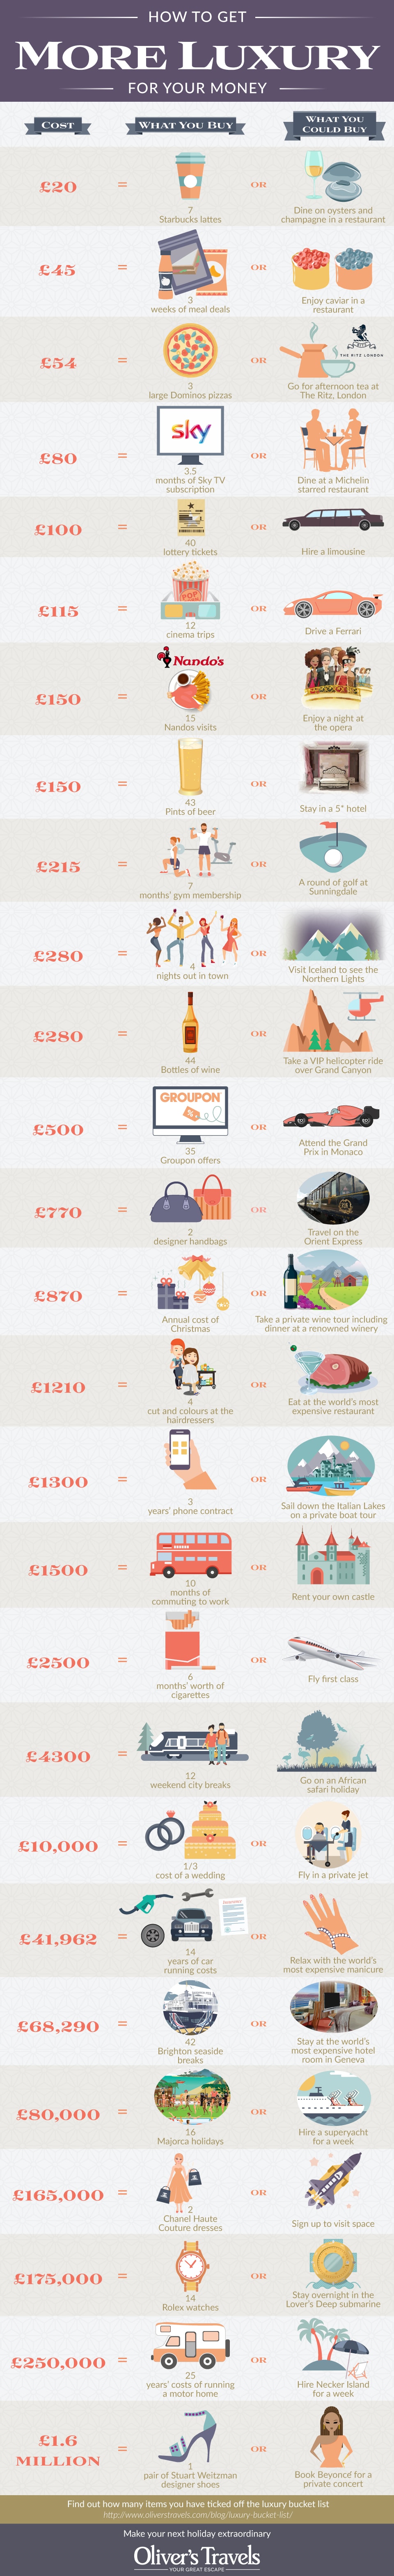 How To Get More Luxury For Your Money [Infographic]